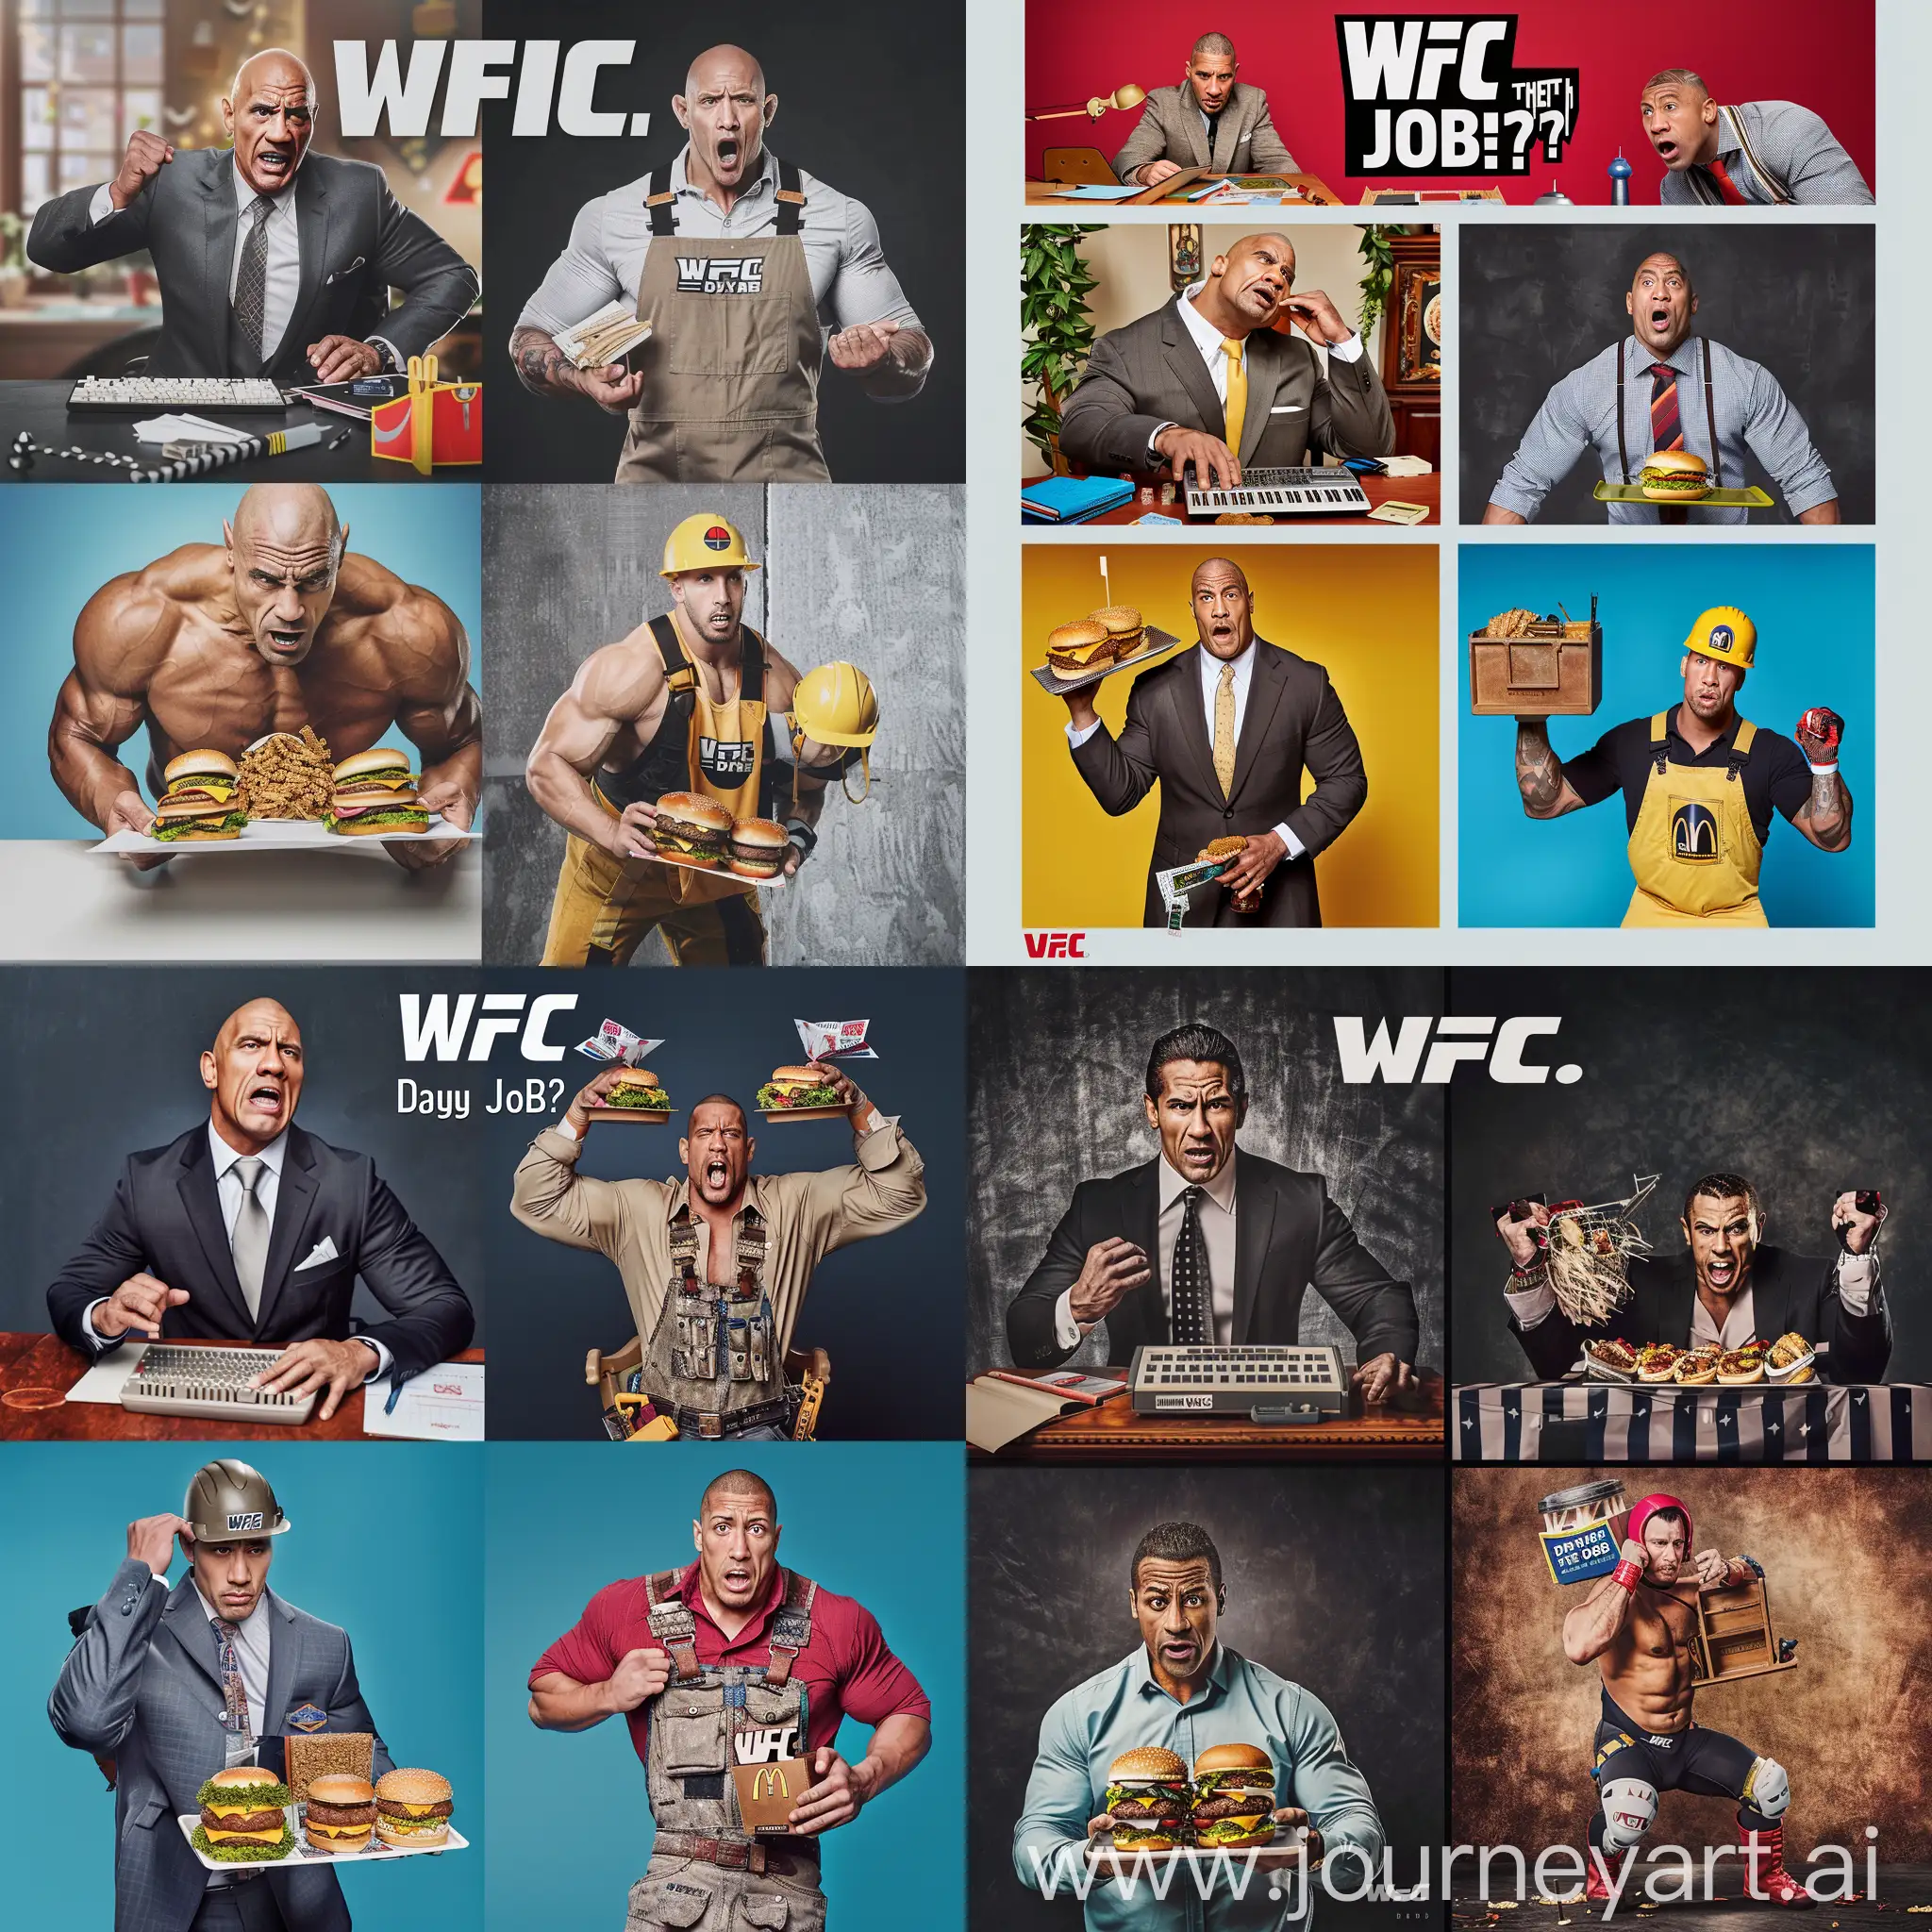 Top Left: A photo of a famous WWE superstar (e.g., The Rock) dressed in a business suit, struggling to type on a tiny keyboard at a cluttered office desk.
Top Right: A photo of another WWE superstar (e.g., John Cena) wearing a fast-food uniform and looking overwhelmed while holding a tray of overflowing burgers.Bottom Center: A photo of a third WWE superstar (e.g., Roman Reigns) dressed in construction gear, lifting a small toolbox with a confused expression.Text:

Bold and playful text above the collage: "WWE: Day Jobs?"
Optional Additions:

You can add the WWE logo in a corner of the image.